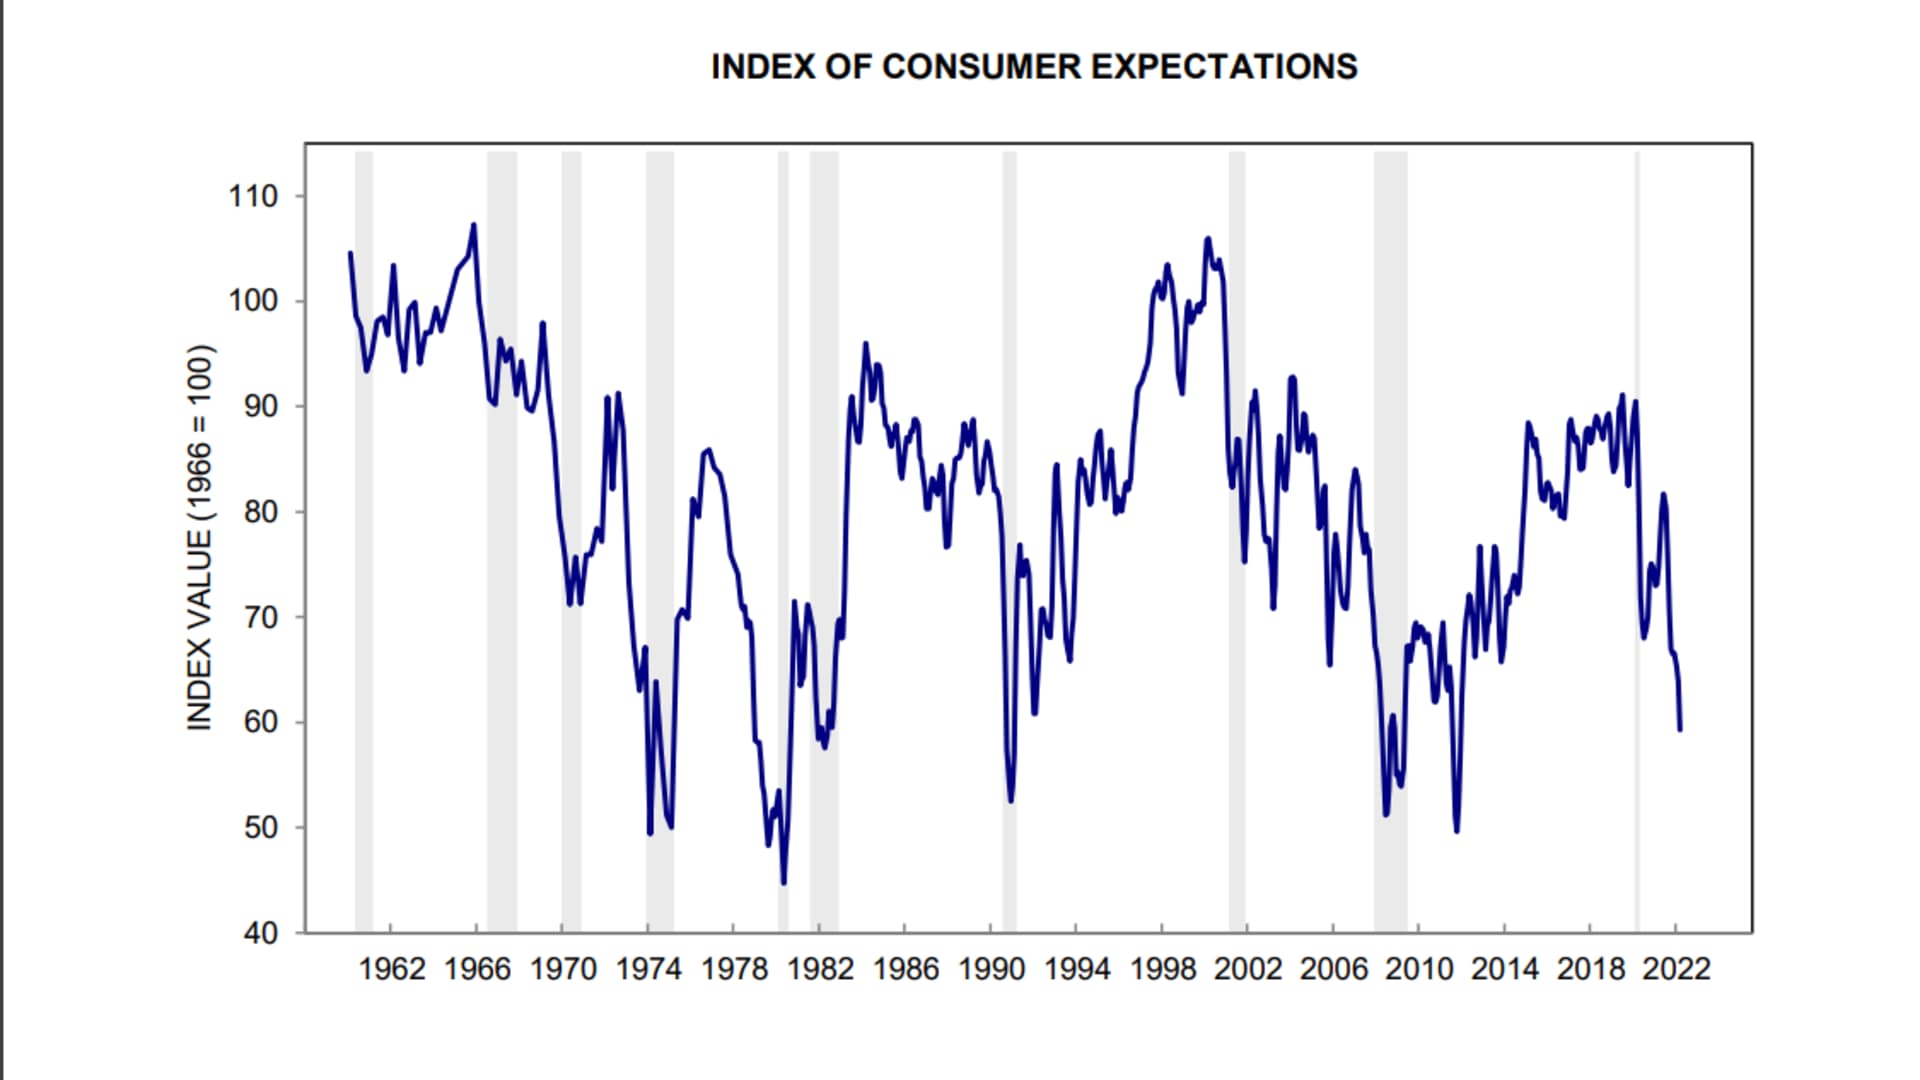 The University of Michigan Index of Consumer Expectations has forecast recessions, which are indicated by gray bars in this chart.